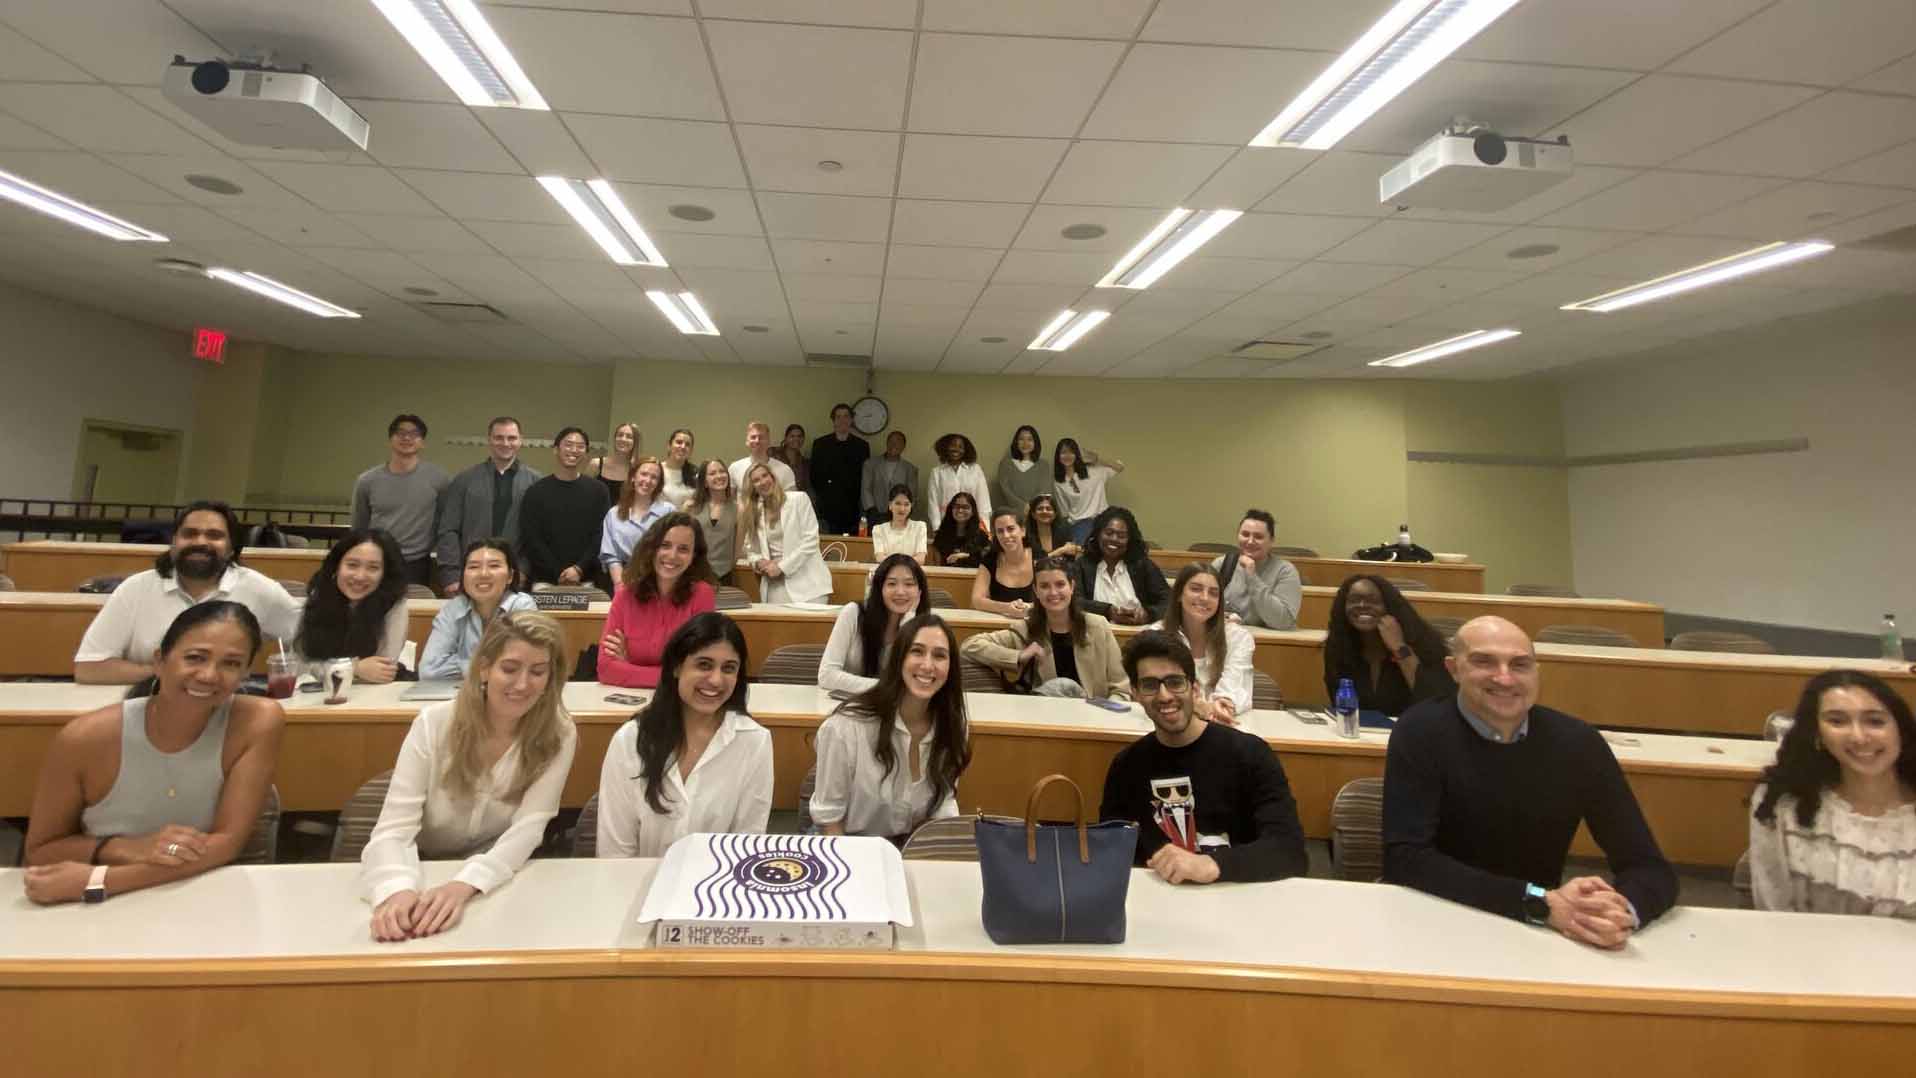 Big Apple Takes Notice: Nosetta Becomes a Case Study for NYU Stern!